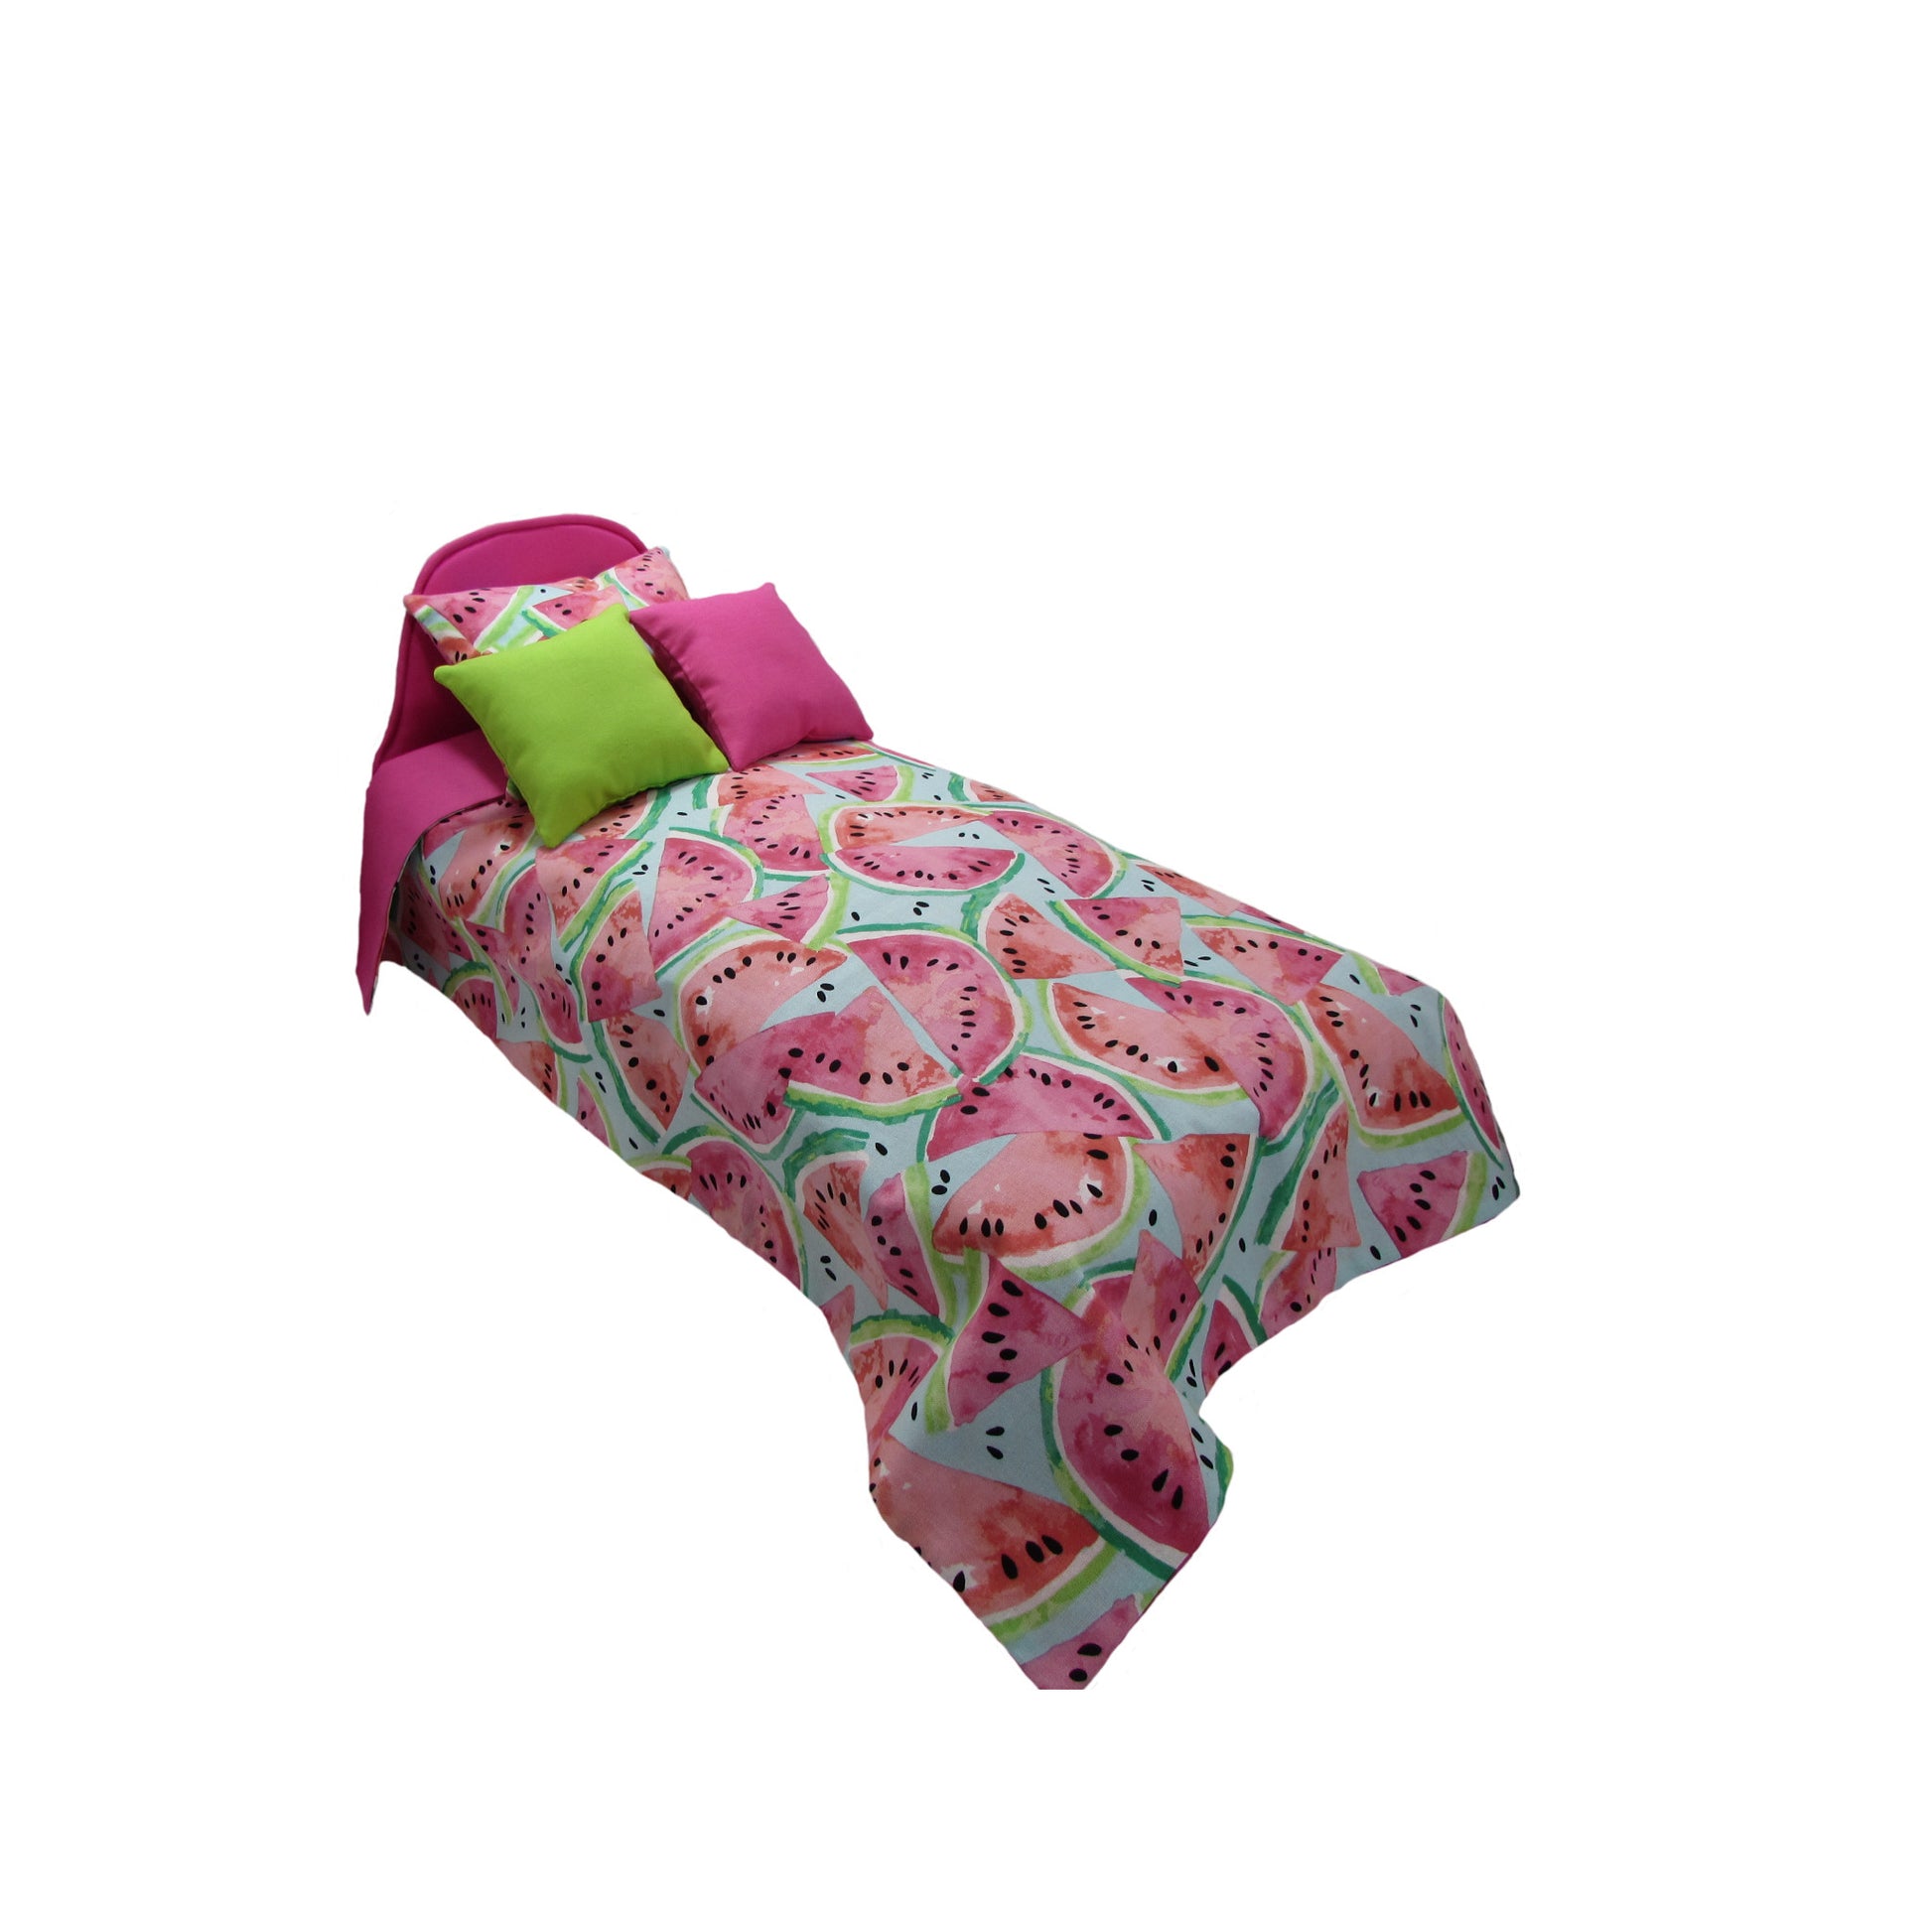 Upholstered Bright Pink Doll and Watermelon Doll Bedding for 14.5-inch dolls